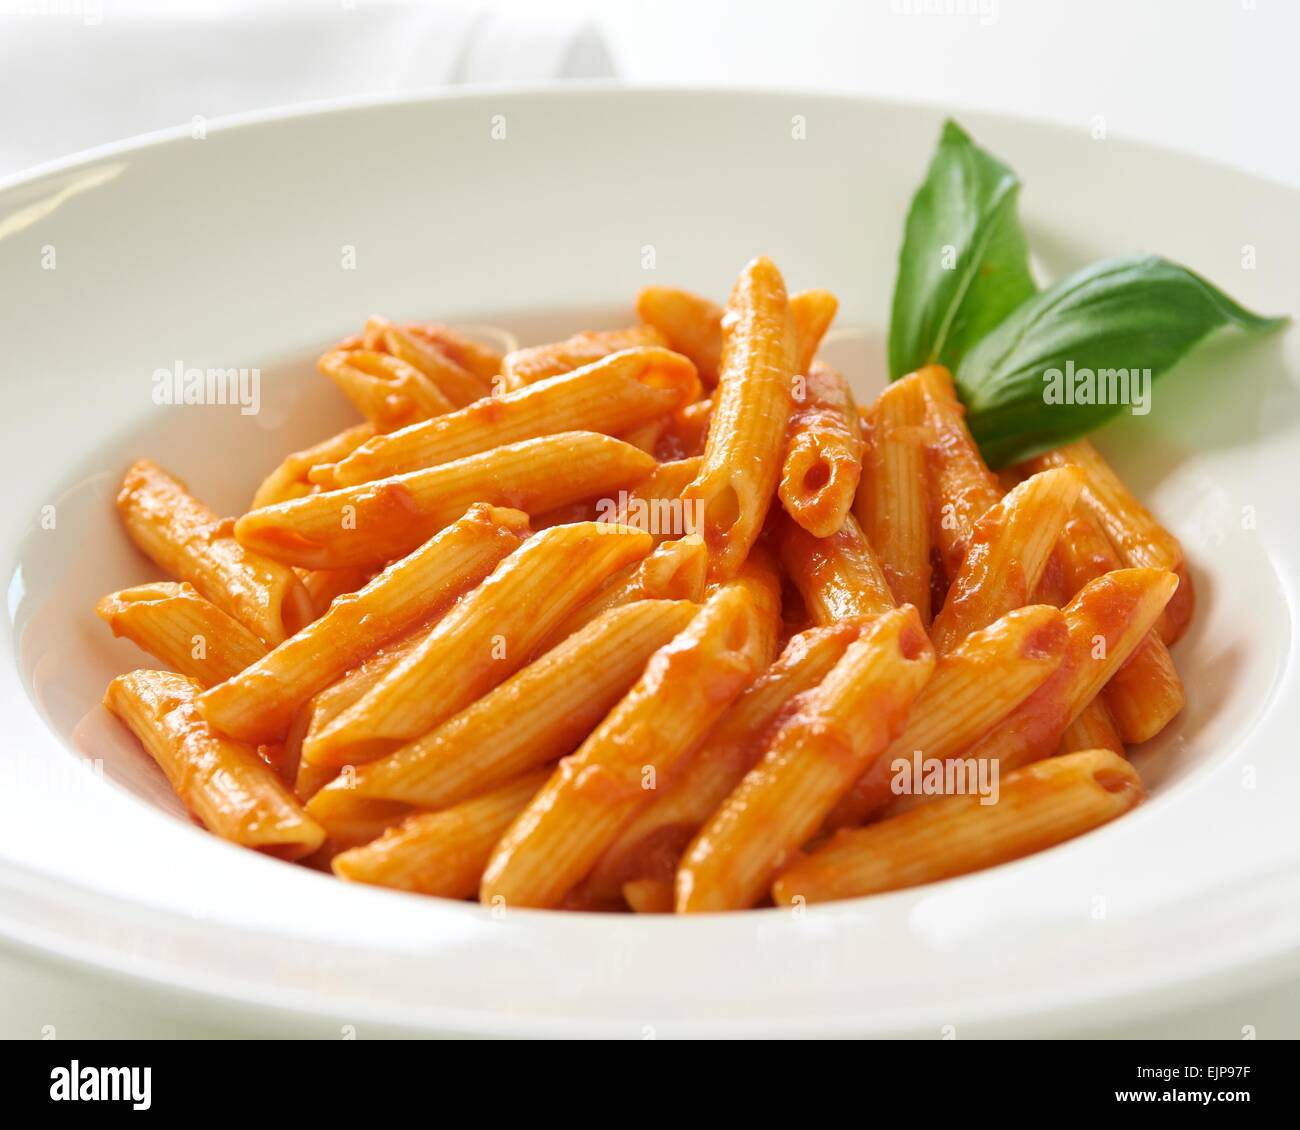 talian plain penne tubes of  pasta mixed with tomato and basil sauce Simple Dinner in a restaurant or care home healthy Stock Photo